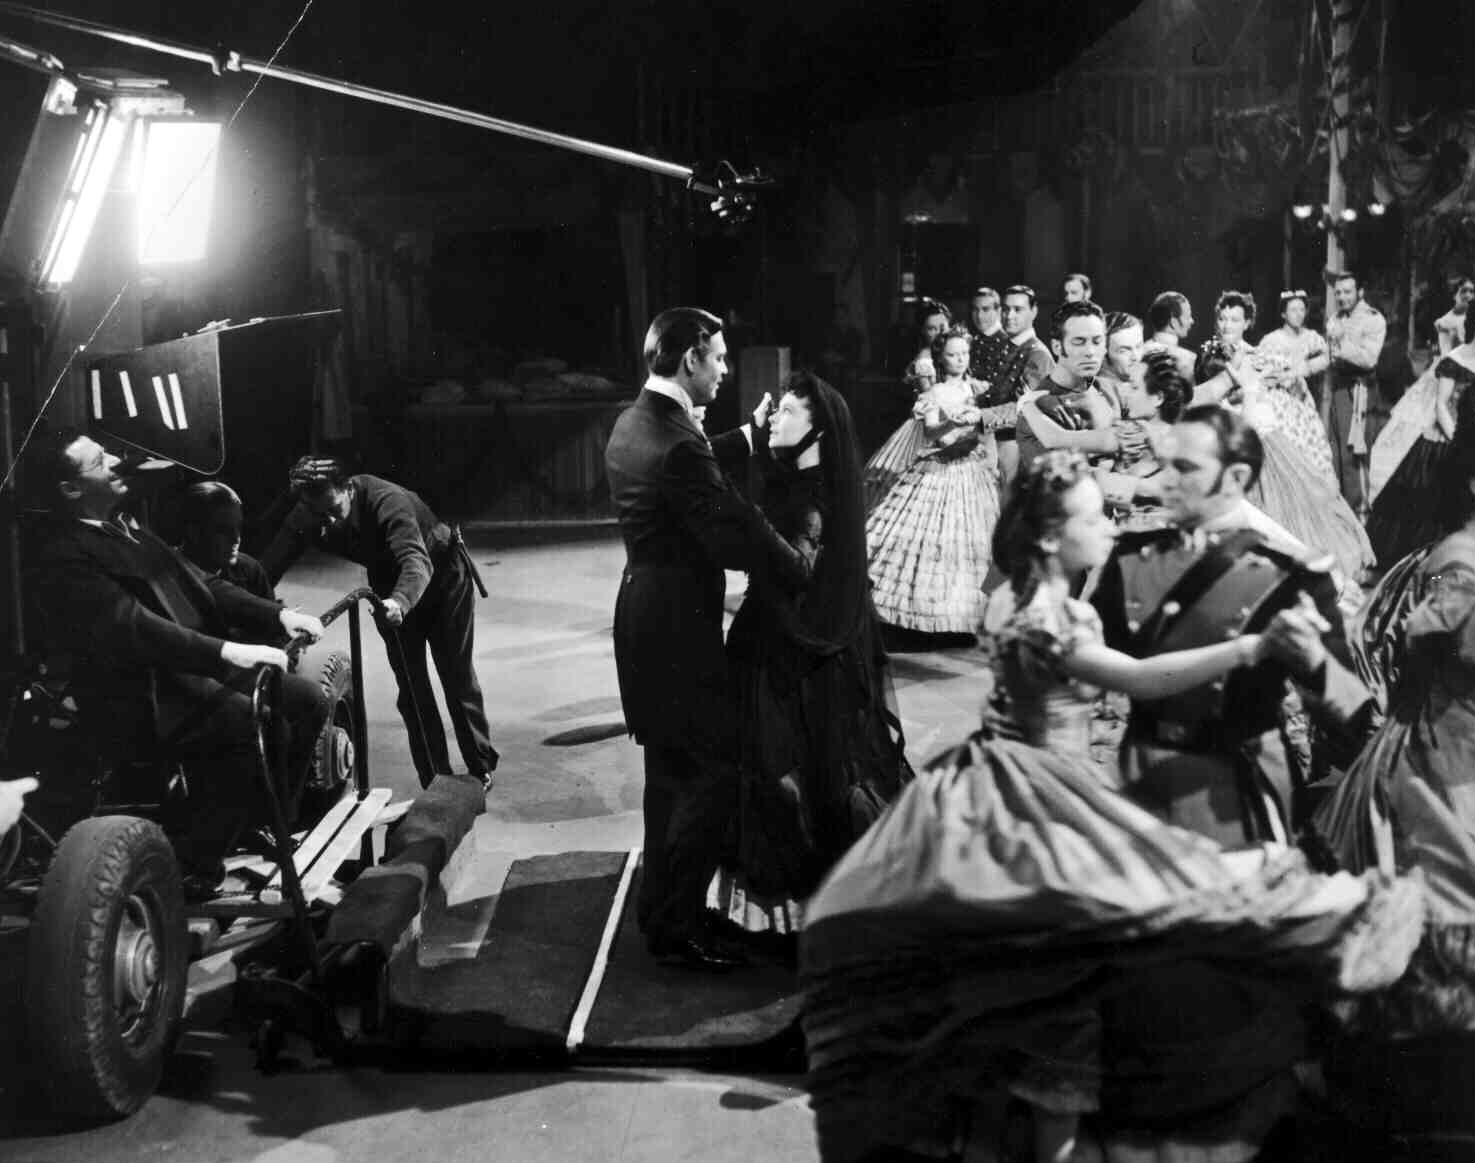 Clark Gable and Vivien Leigh on the set of Gone with the Wind in 1939.